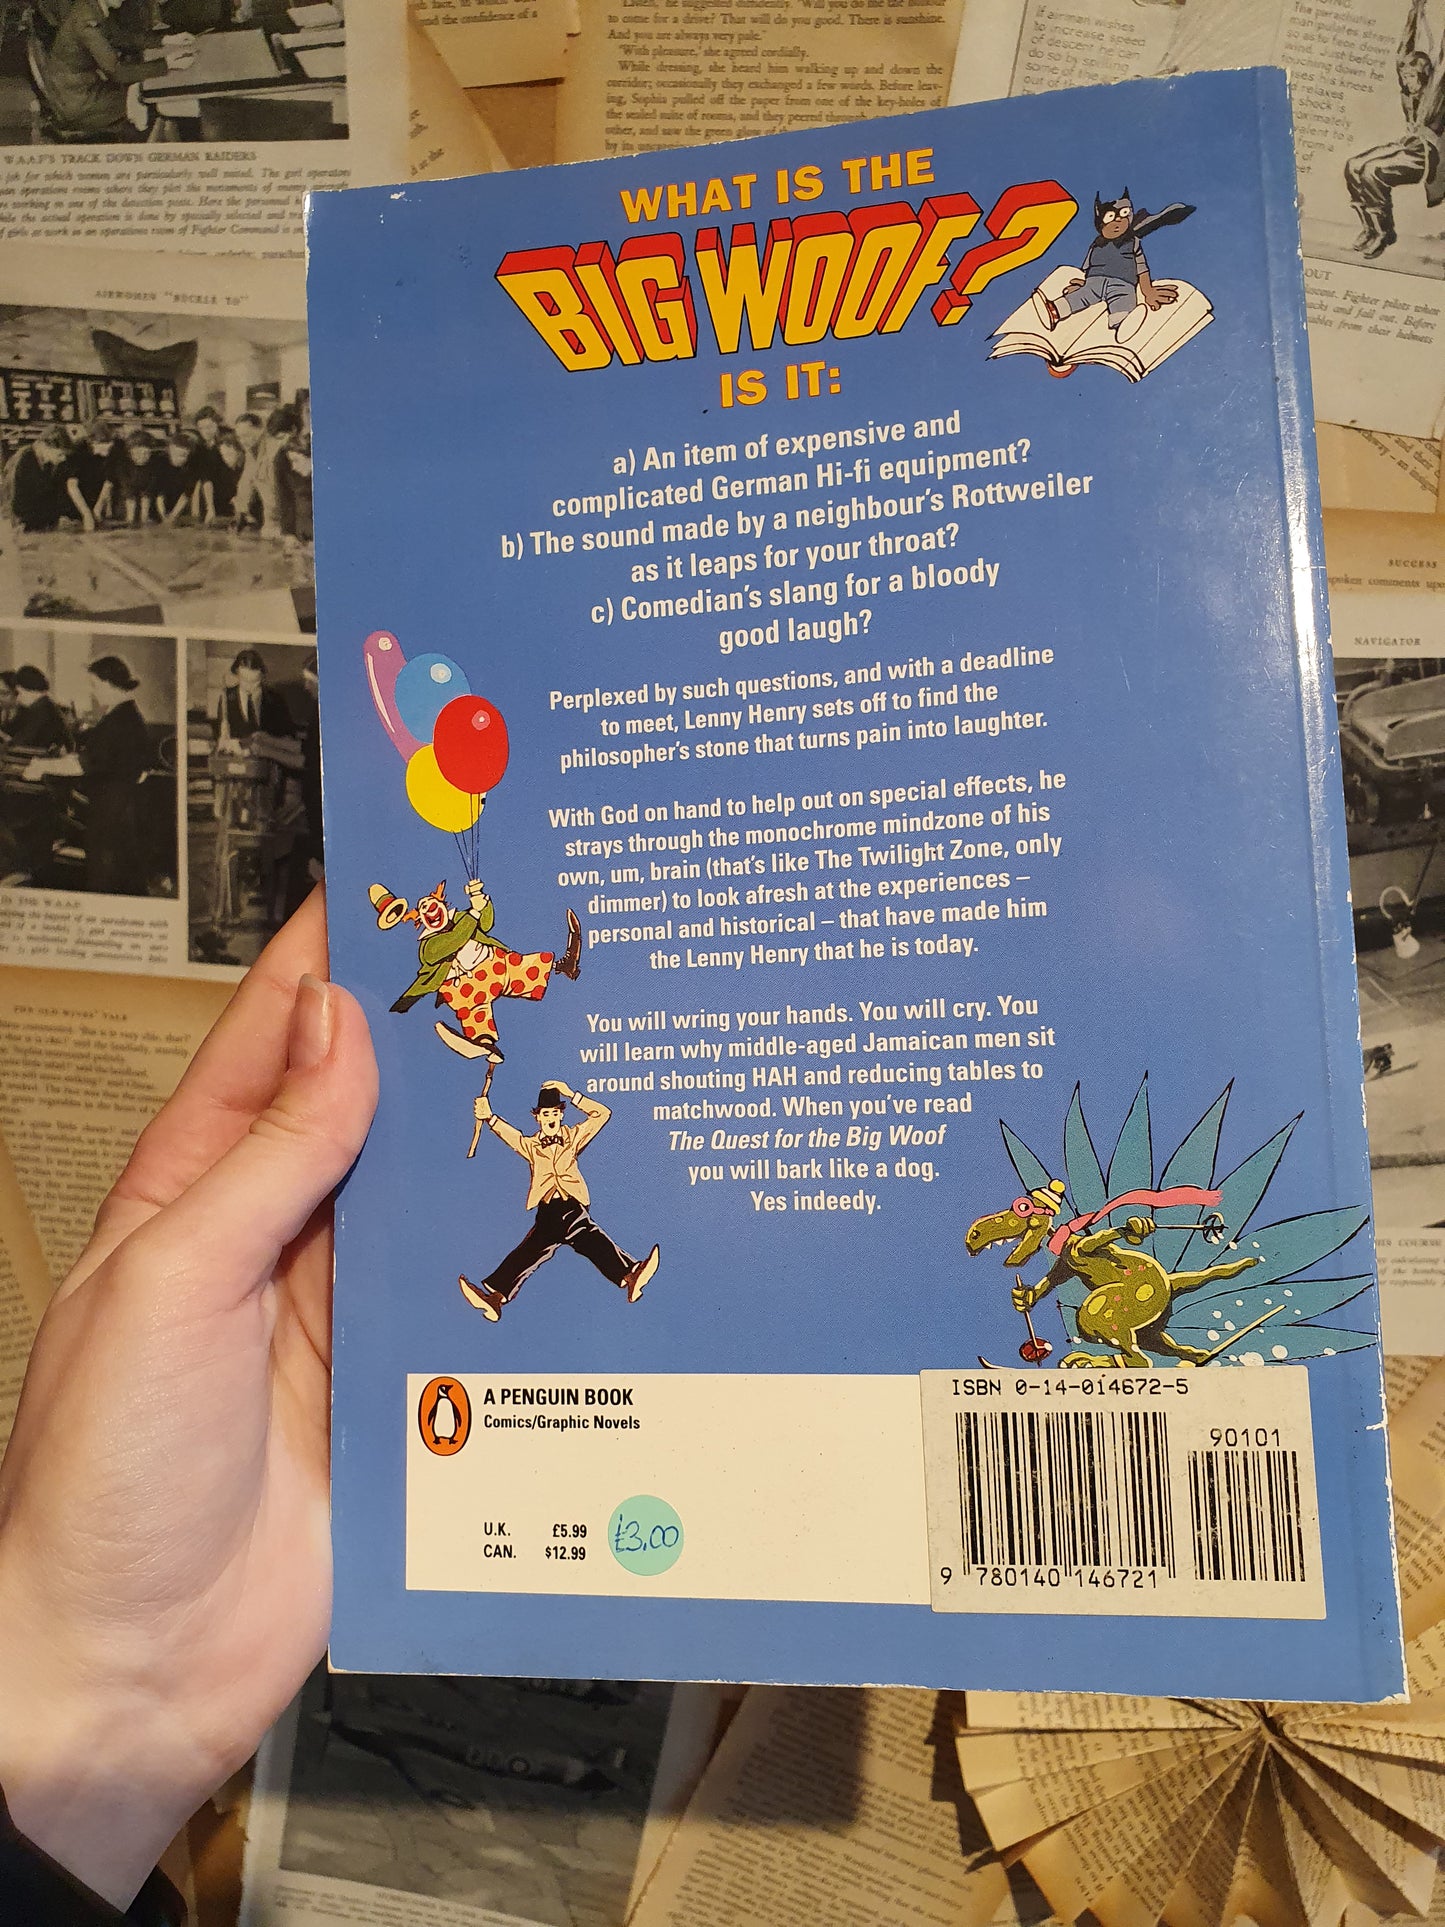 The Quest for the Big Woof by Lenny Henry & Steve Parkhouse (1991)